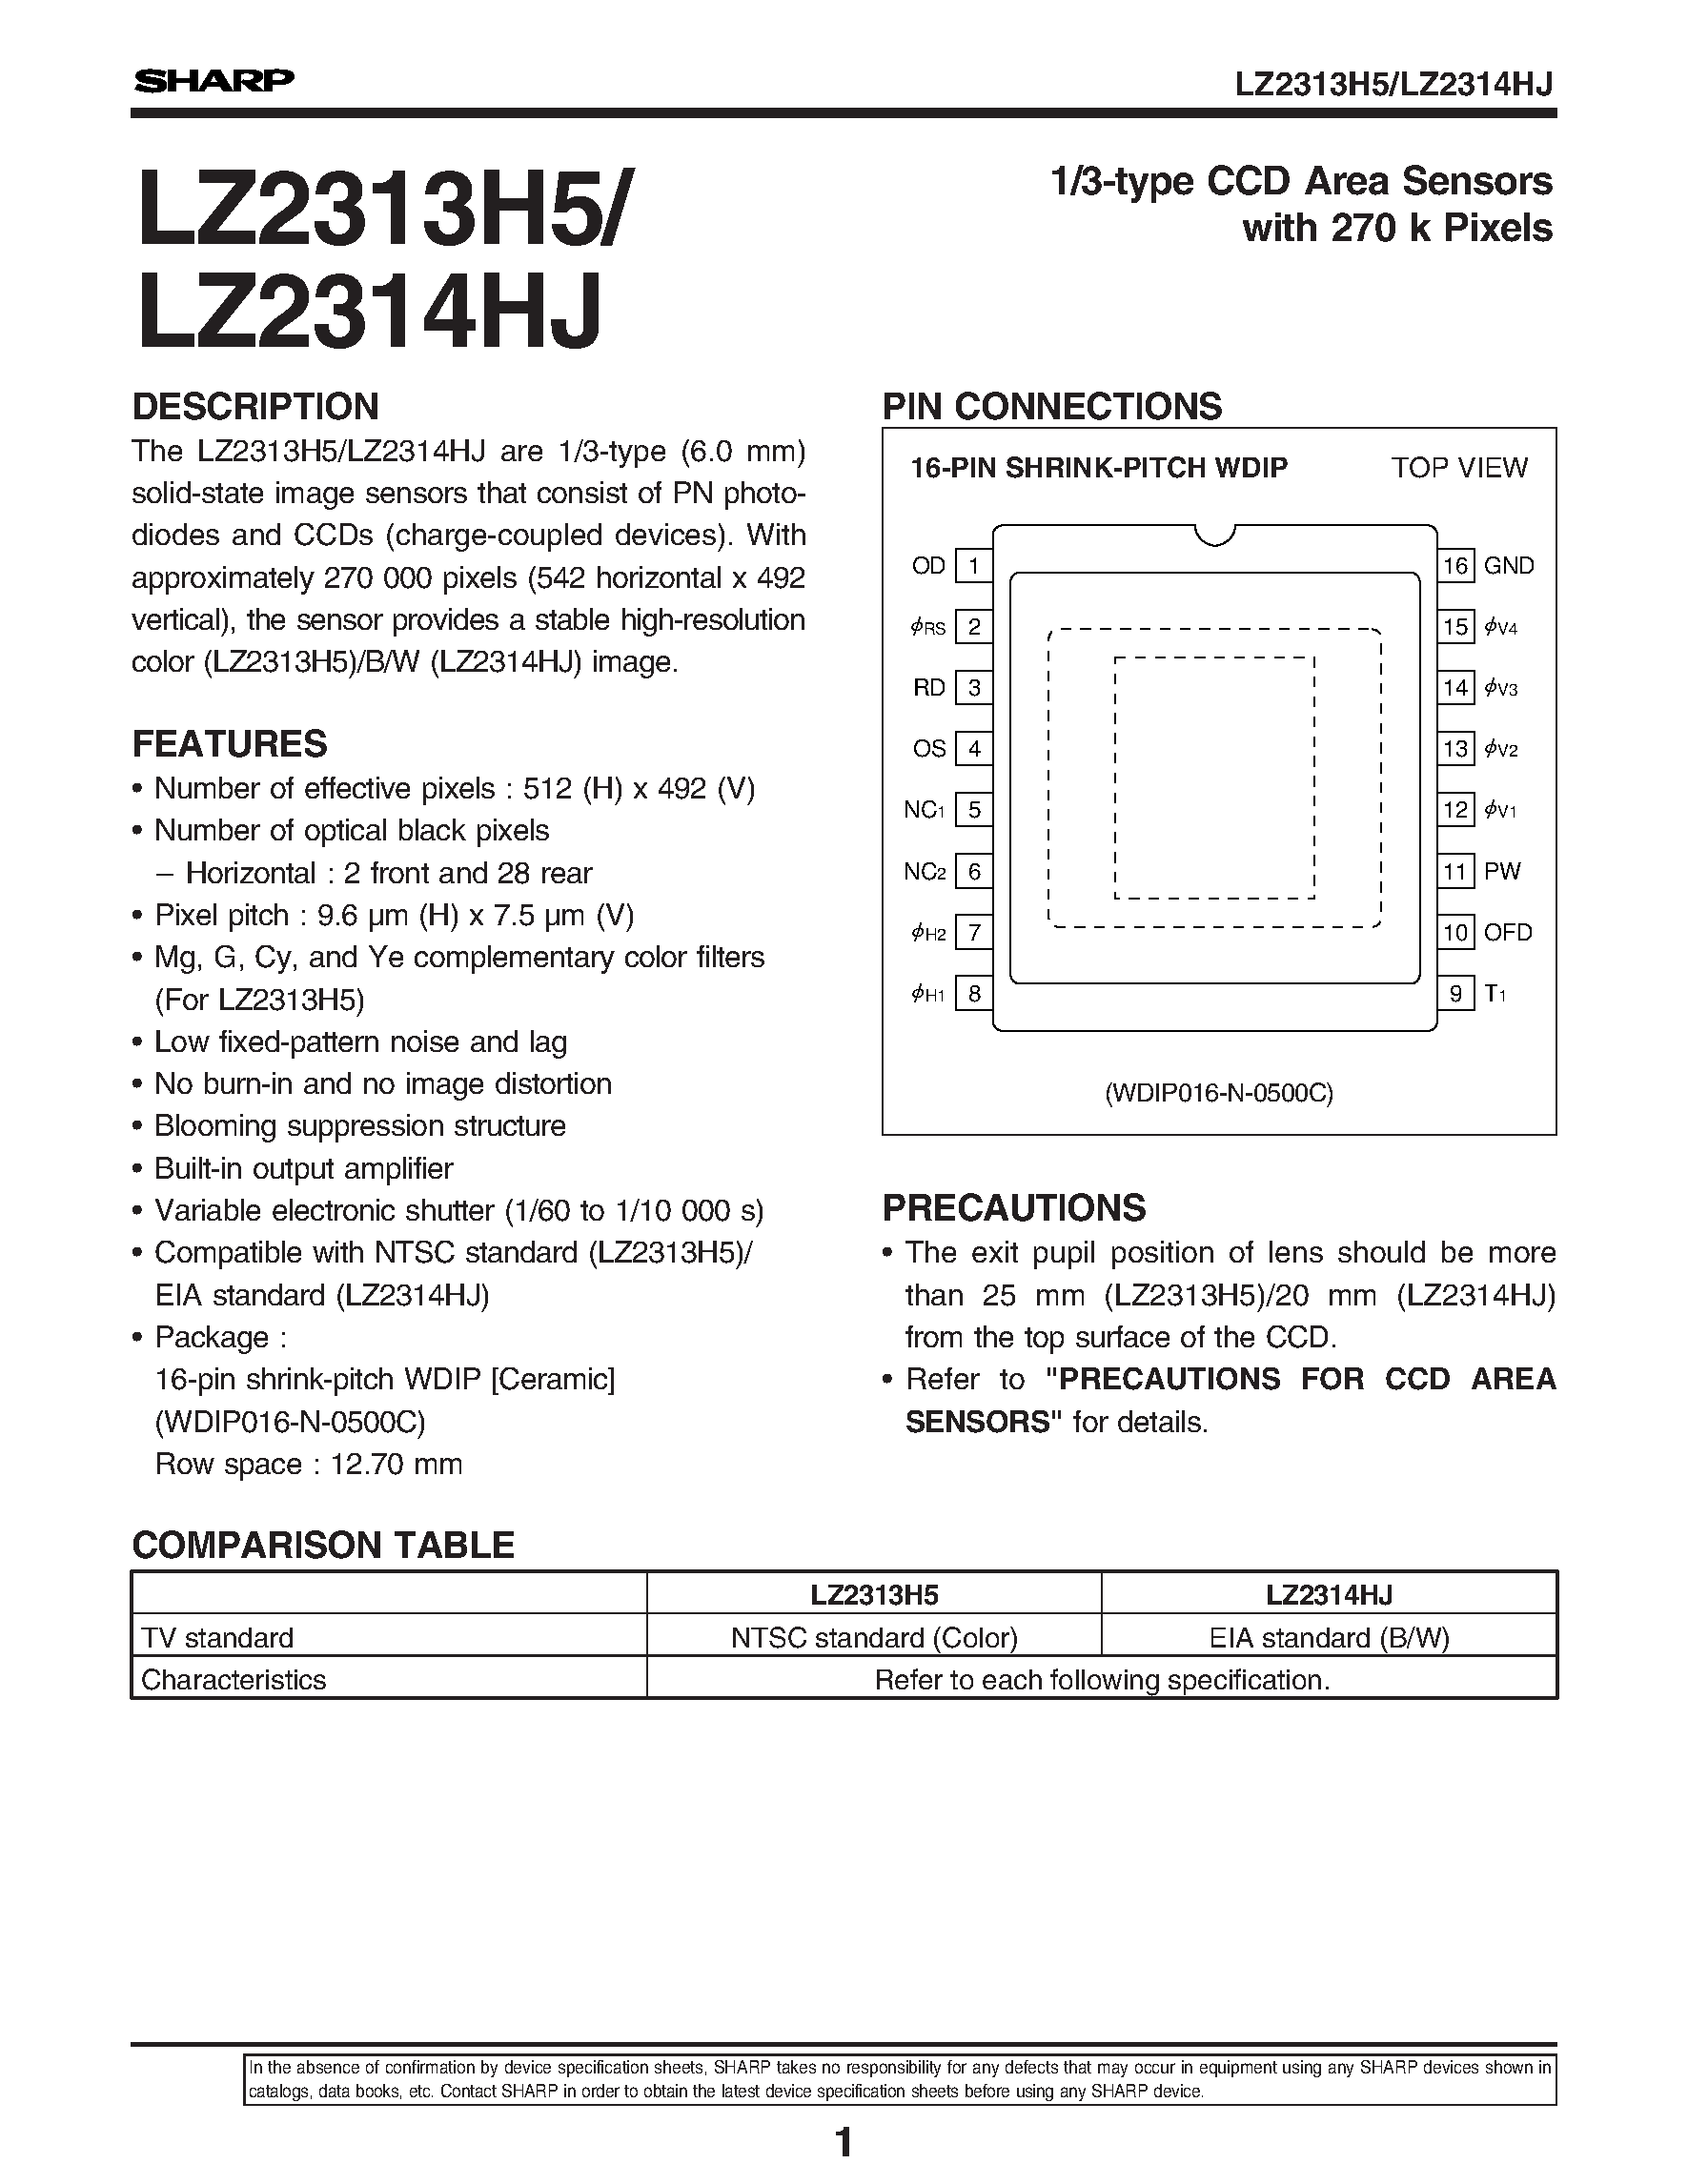 Datasheet LZ2313H5 - 1/3-type CCD Area Sensors with 270 k Pixels page 1